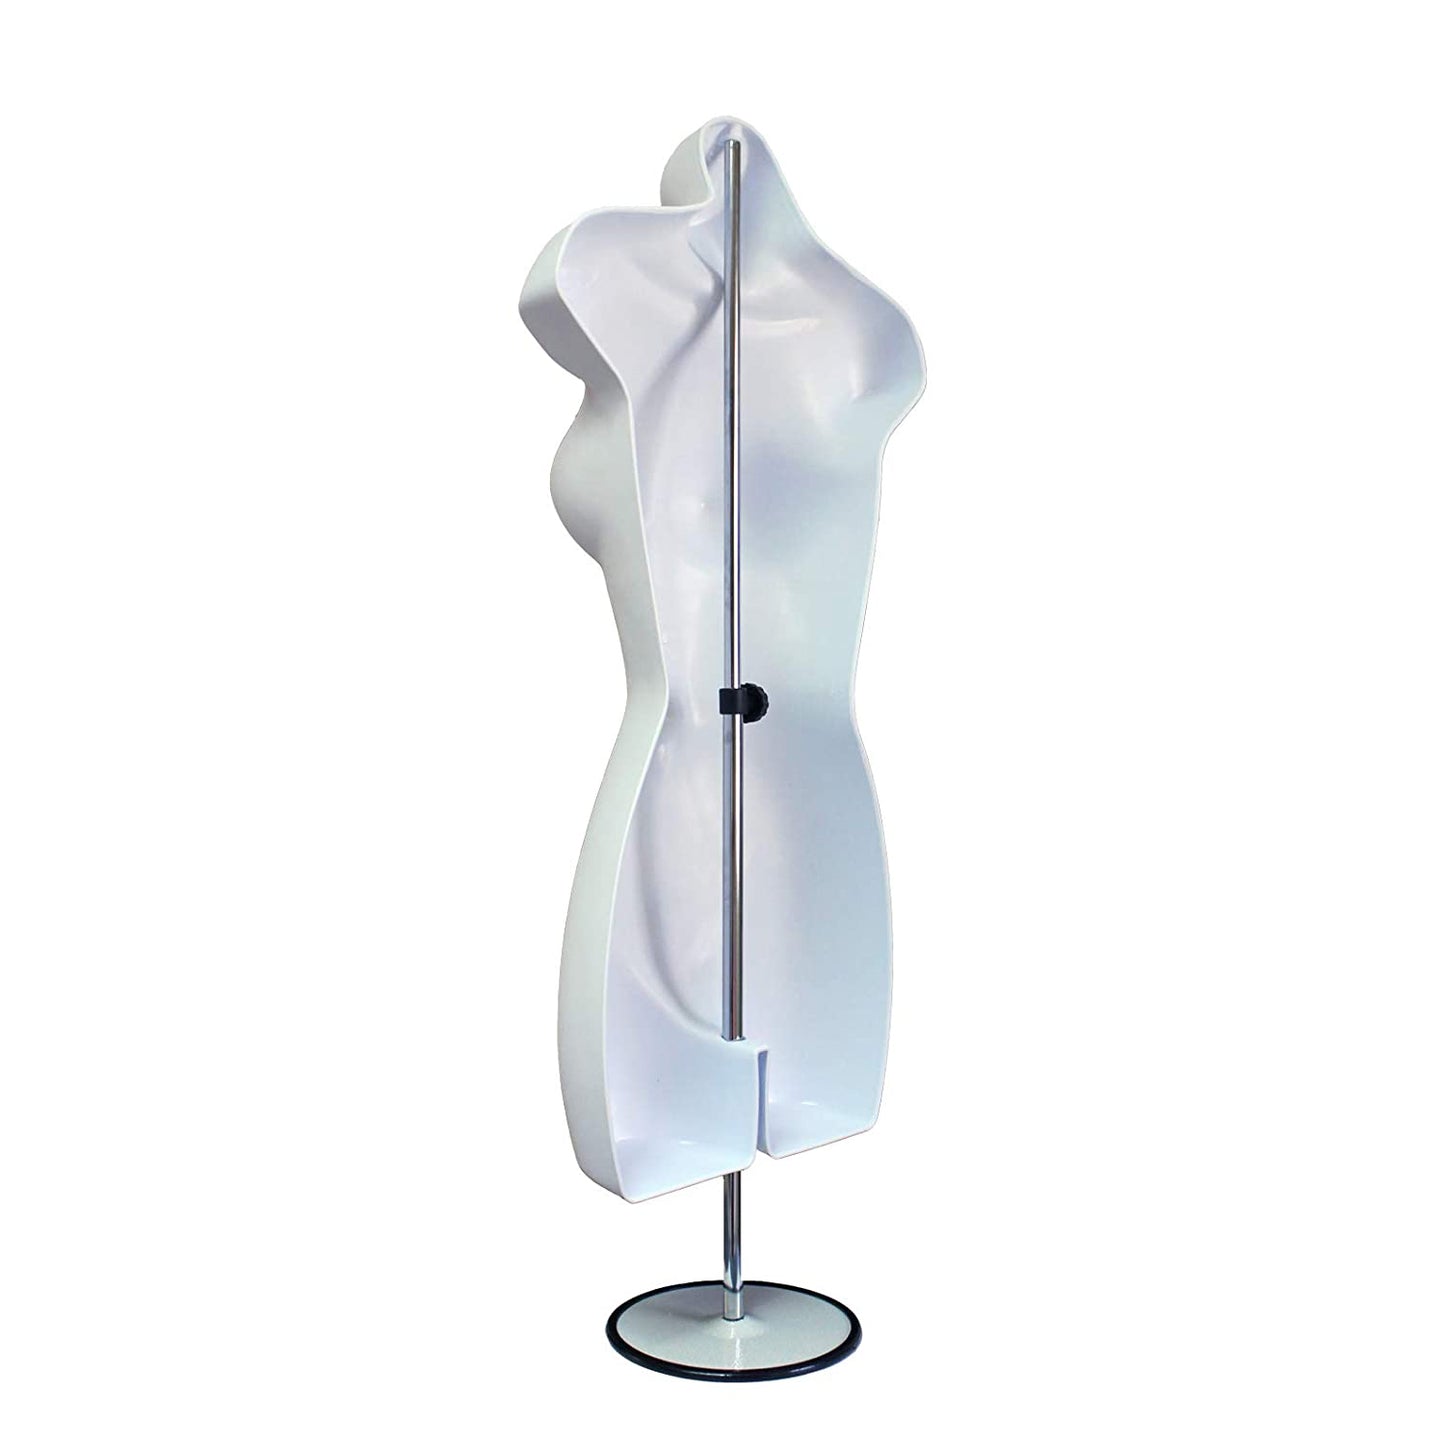 White Female Mannequin Hip Long Hollow Back Body Torso Set w/Metal Stand with Metal Pole & Hanging Hook, S-M Size